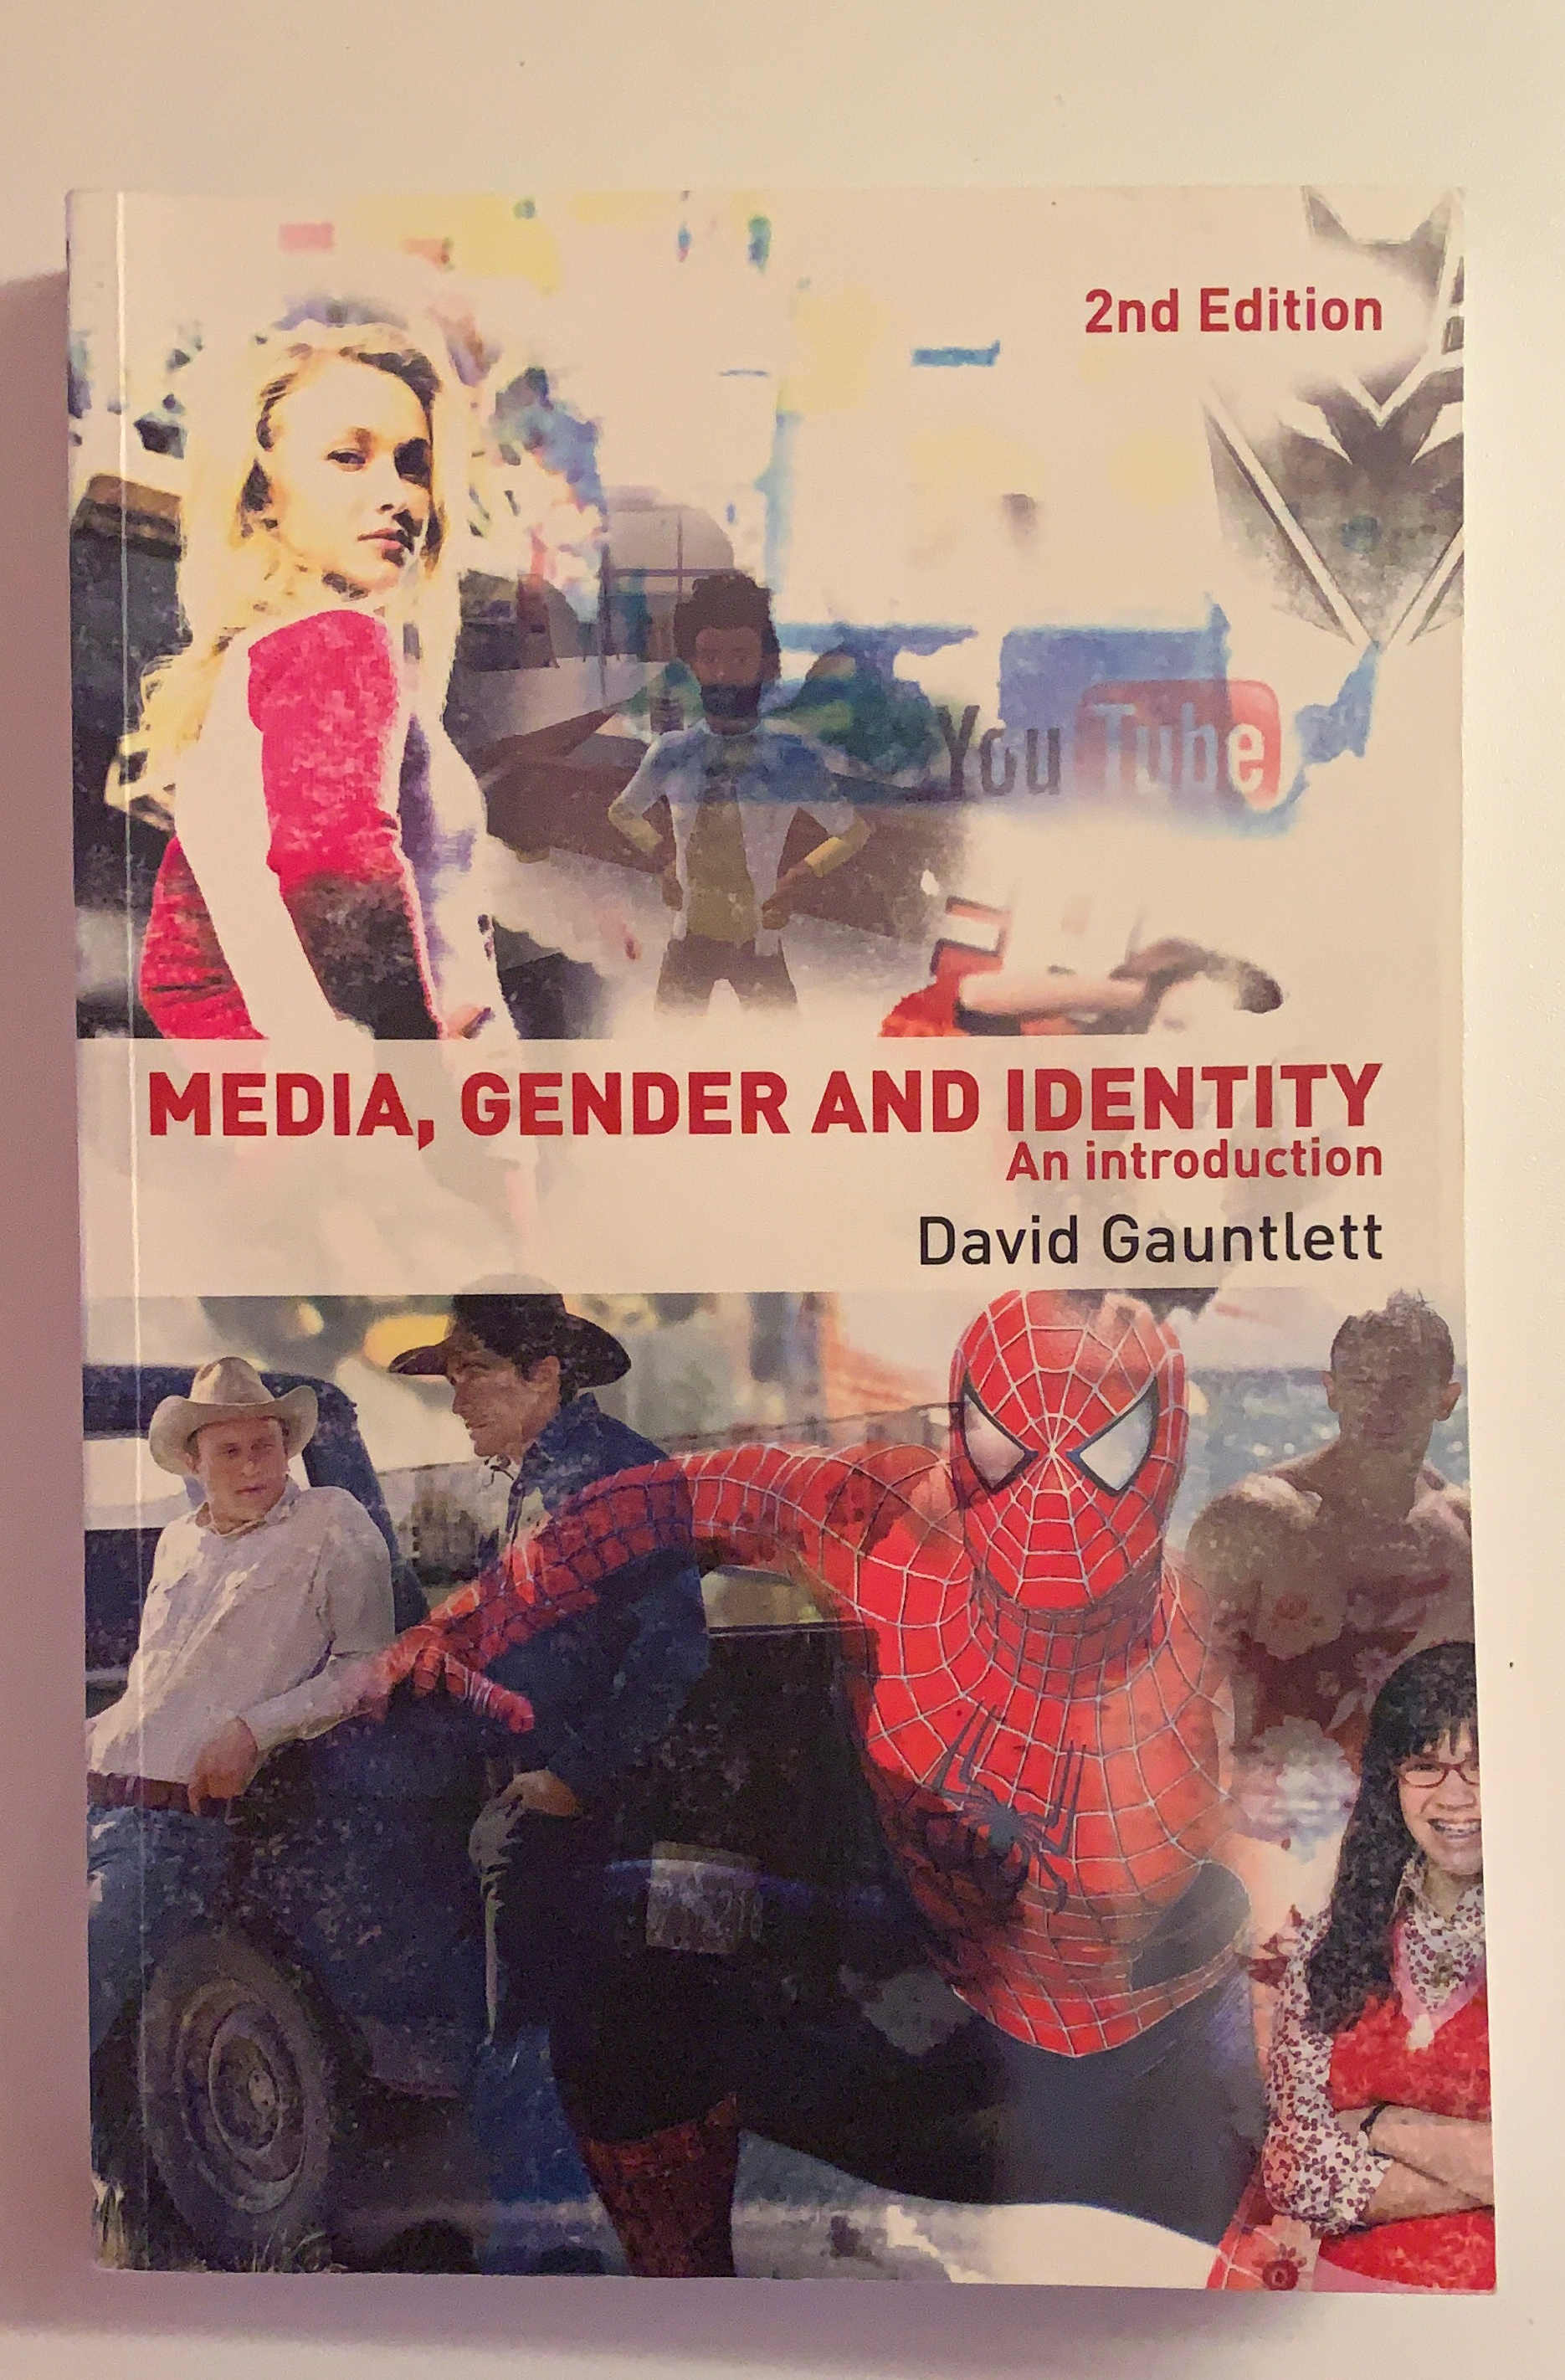 Media, Gender and Identity - An introduction